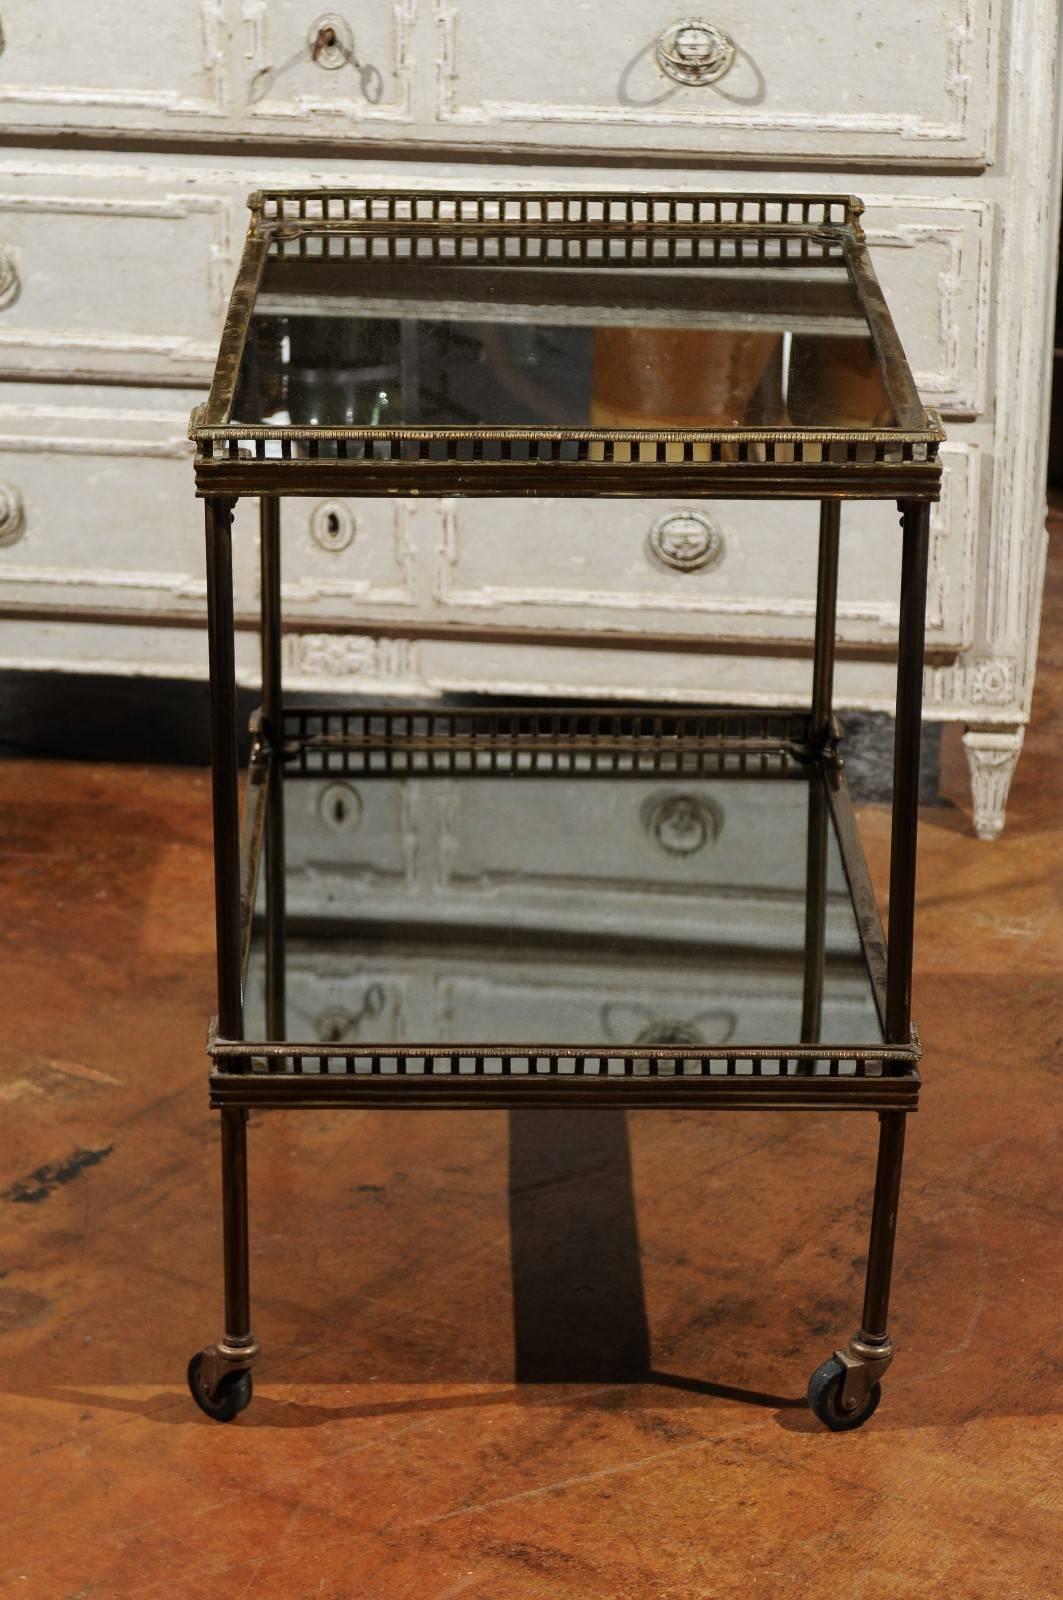 20th Century Continental Tiered Brass Trolley on Casters with Mirrored Shelves, circa 1900